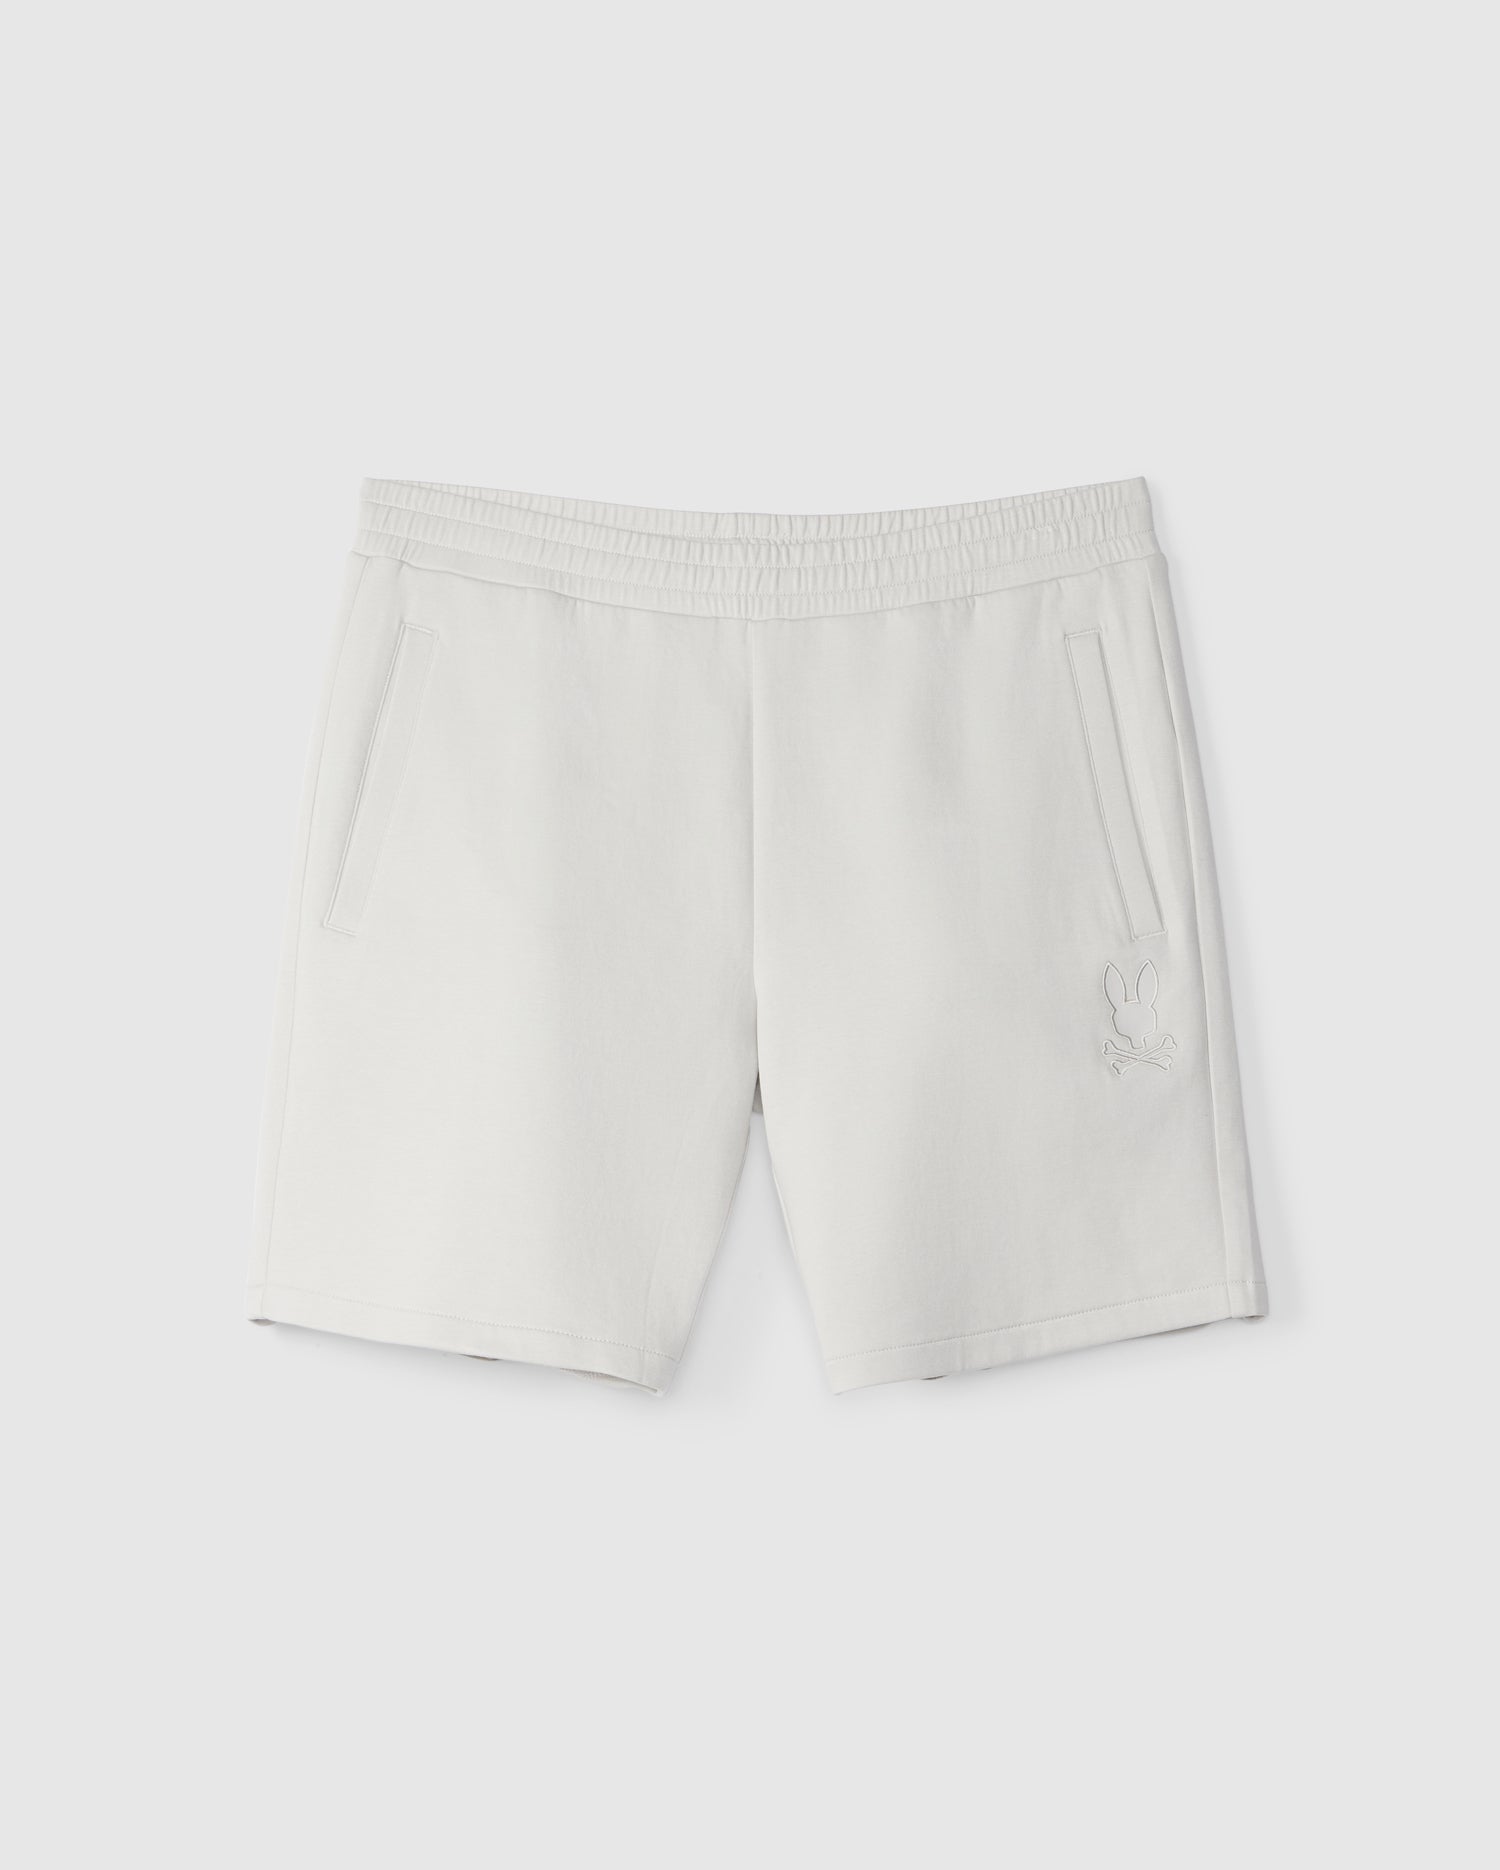 White Psycho Bunny sweatshorts with an elastic waistband and side pockets, featuring a small embroidered logo on the lower left leg, displayed against a plain background.